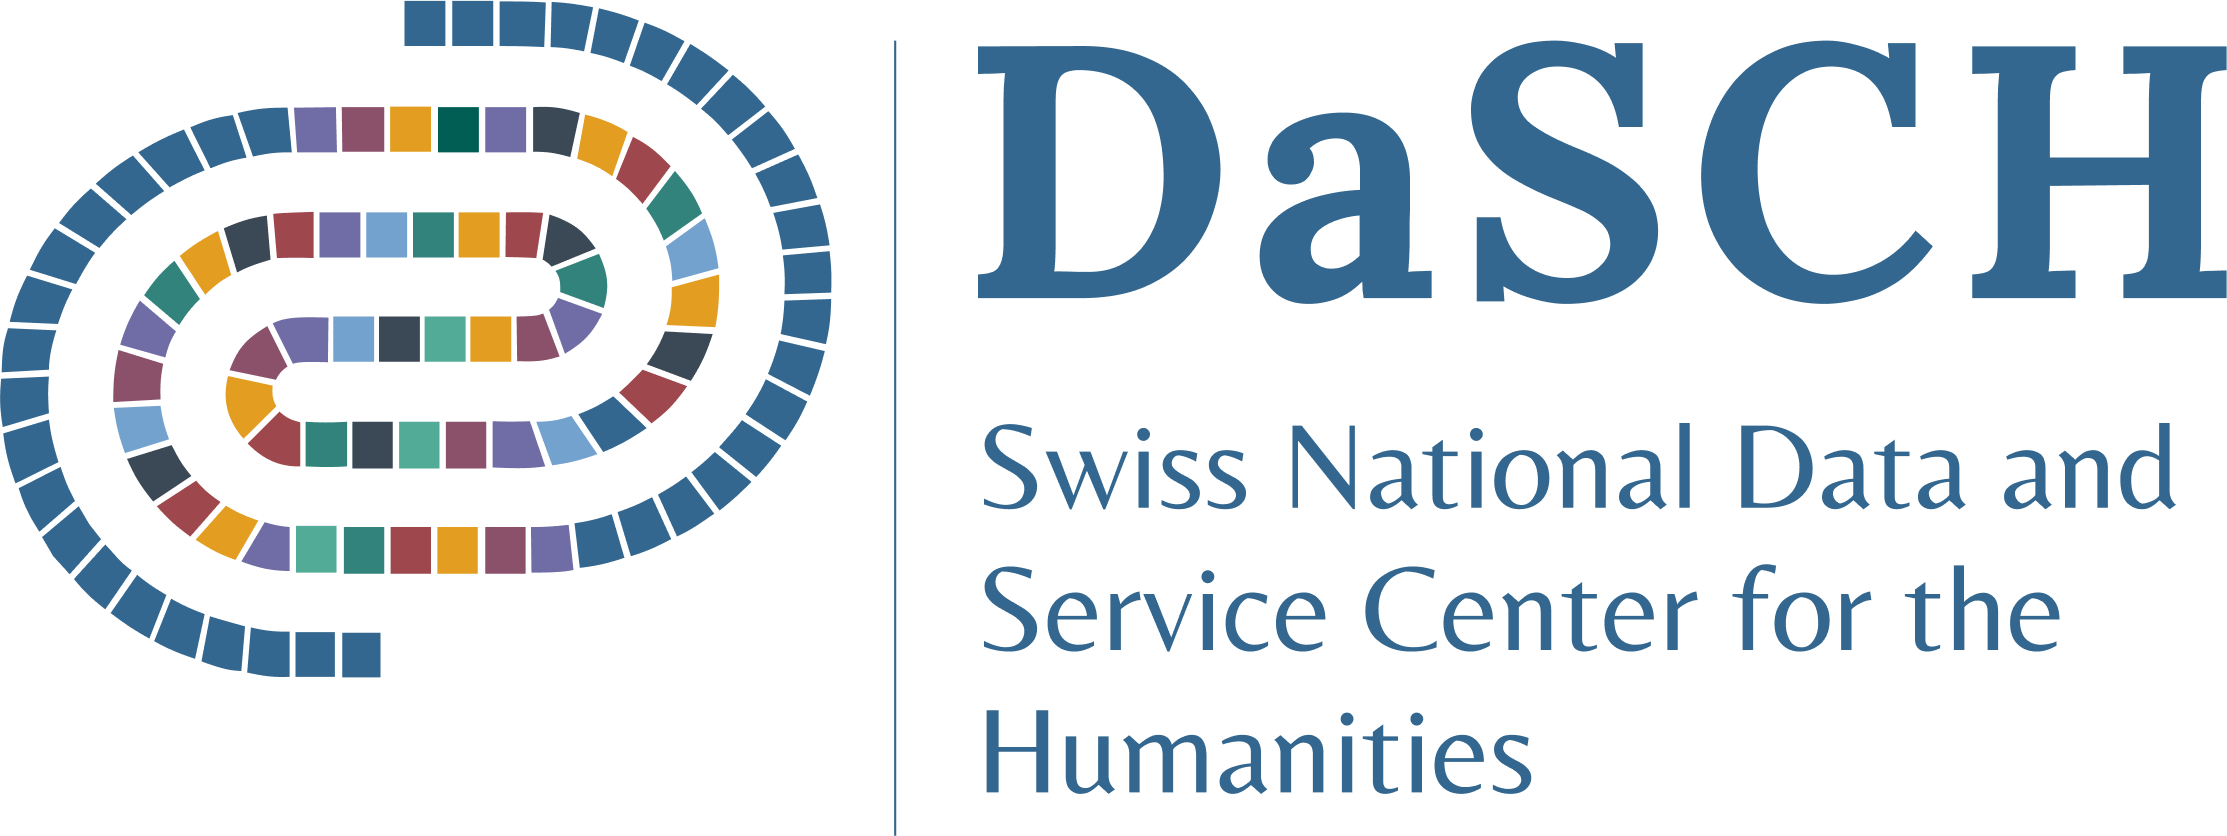 DaSCH - Swiss National Data and Service Center for the Humanities (University of Basel) logo